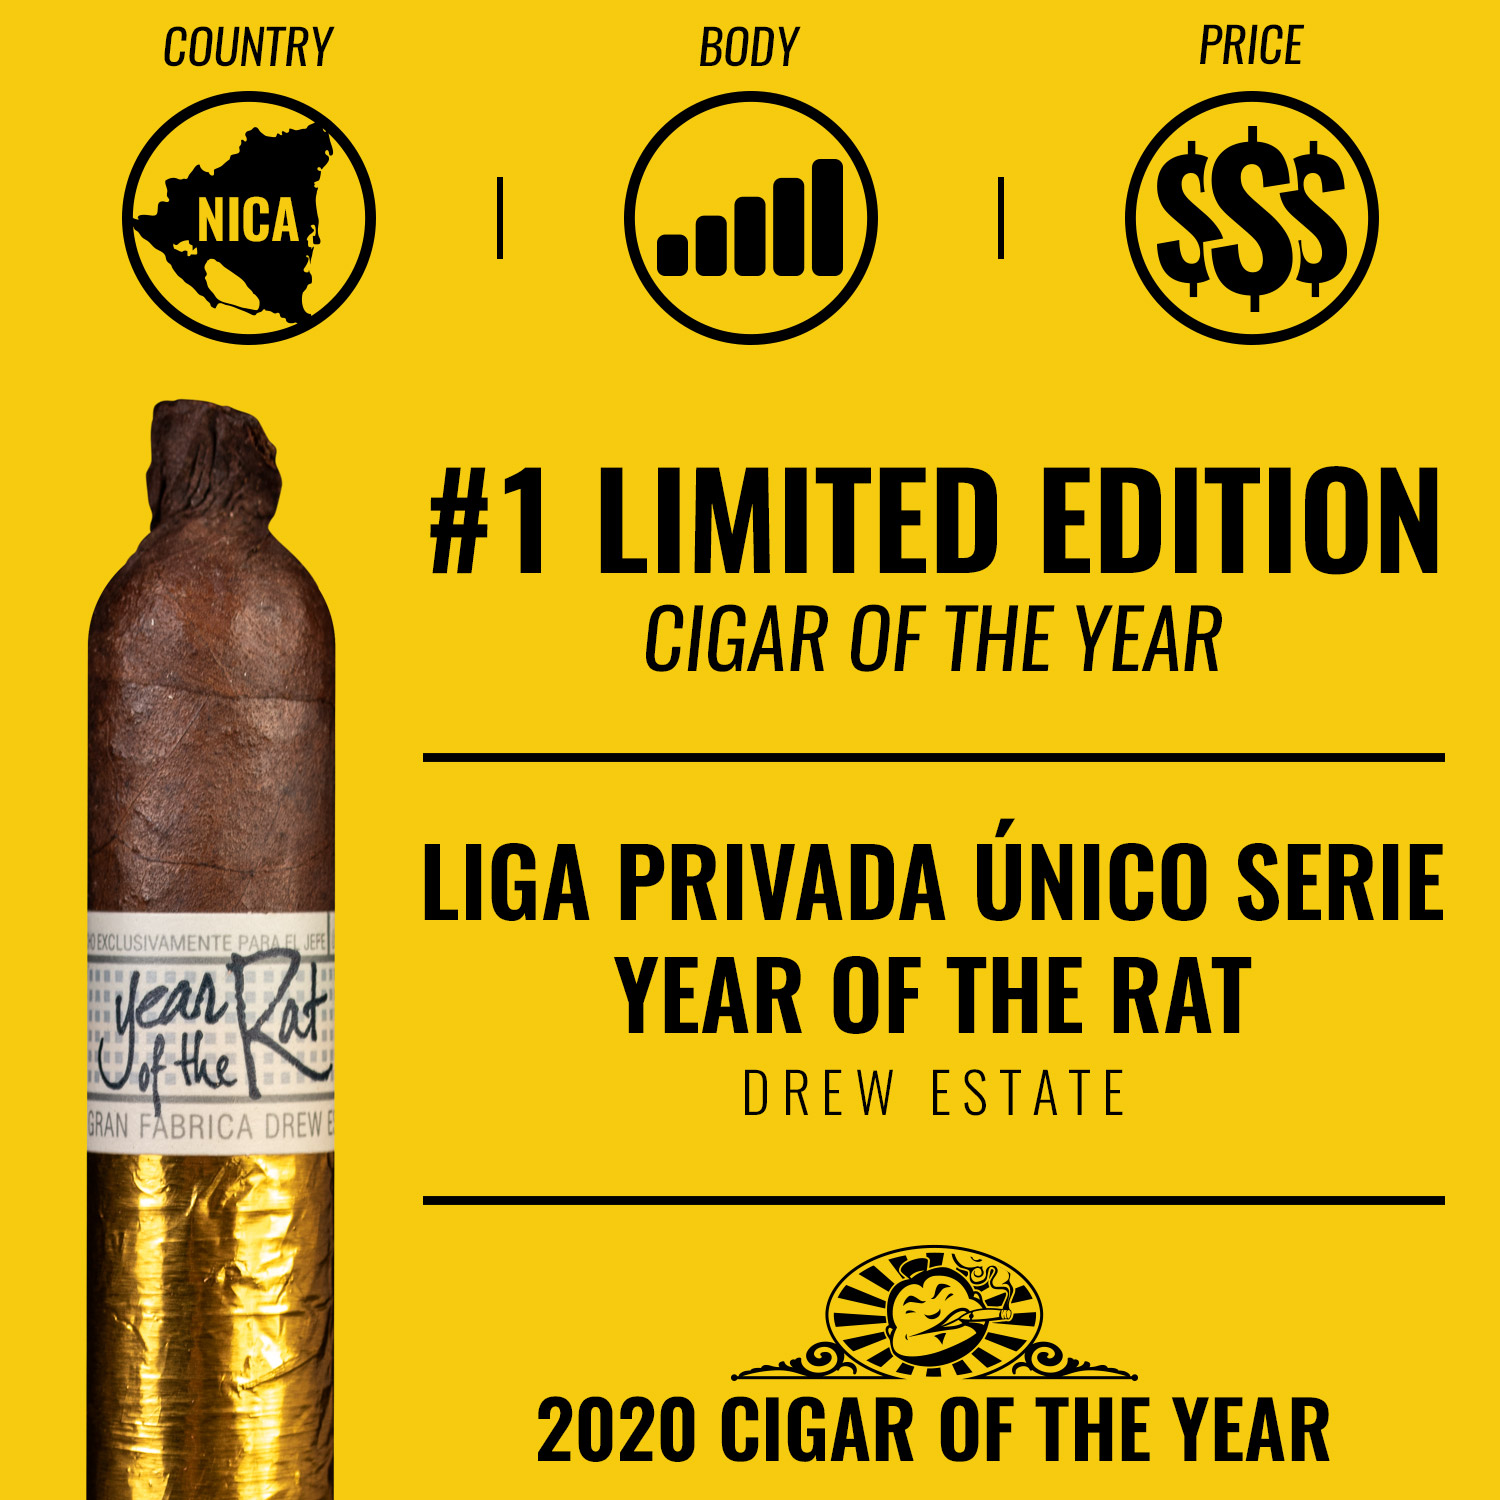 Liga Privada Único Serie Year of the Rat (2020) No. 1 Limited Edition Cigar of the Year 2020